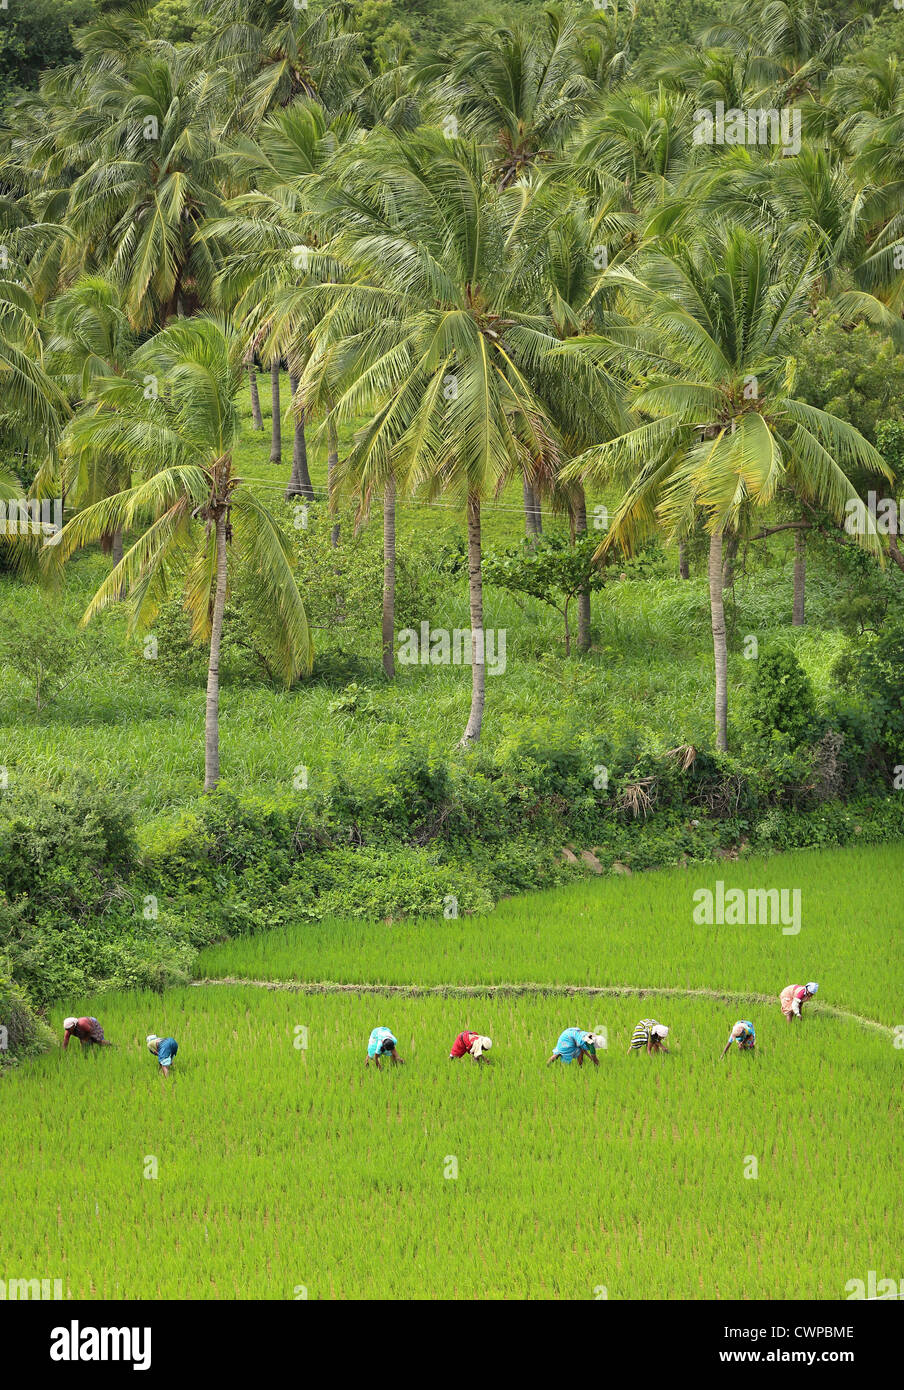 Indian women working in a paddy field Andhra Pradesh South India Stock Photo